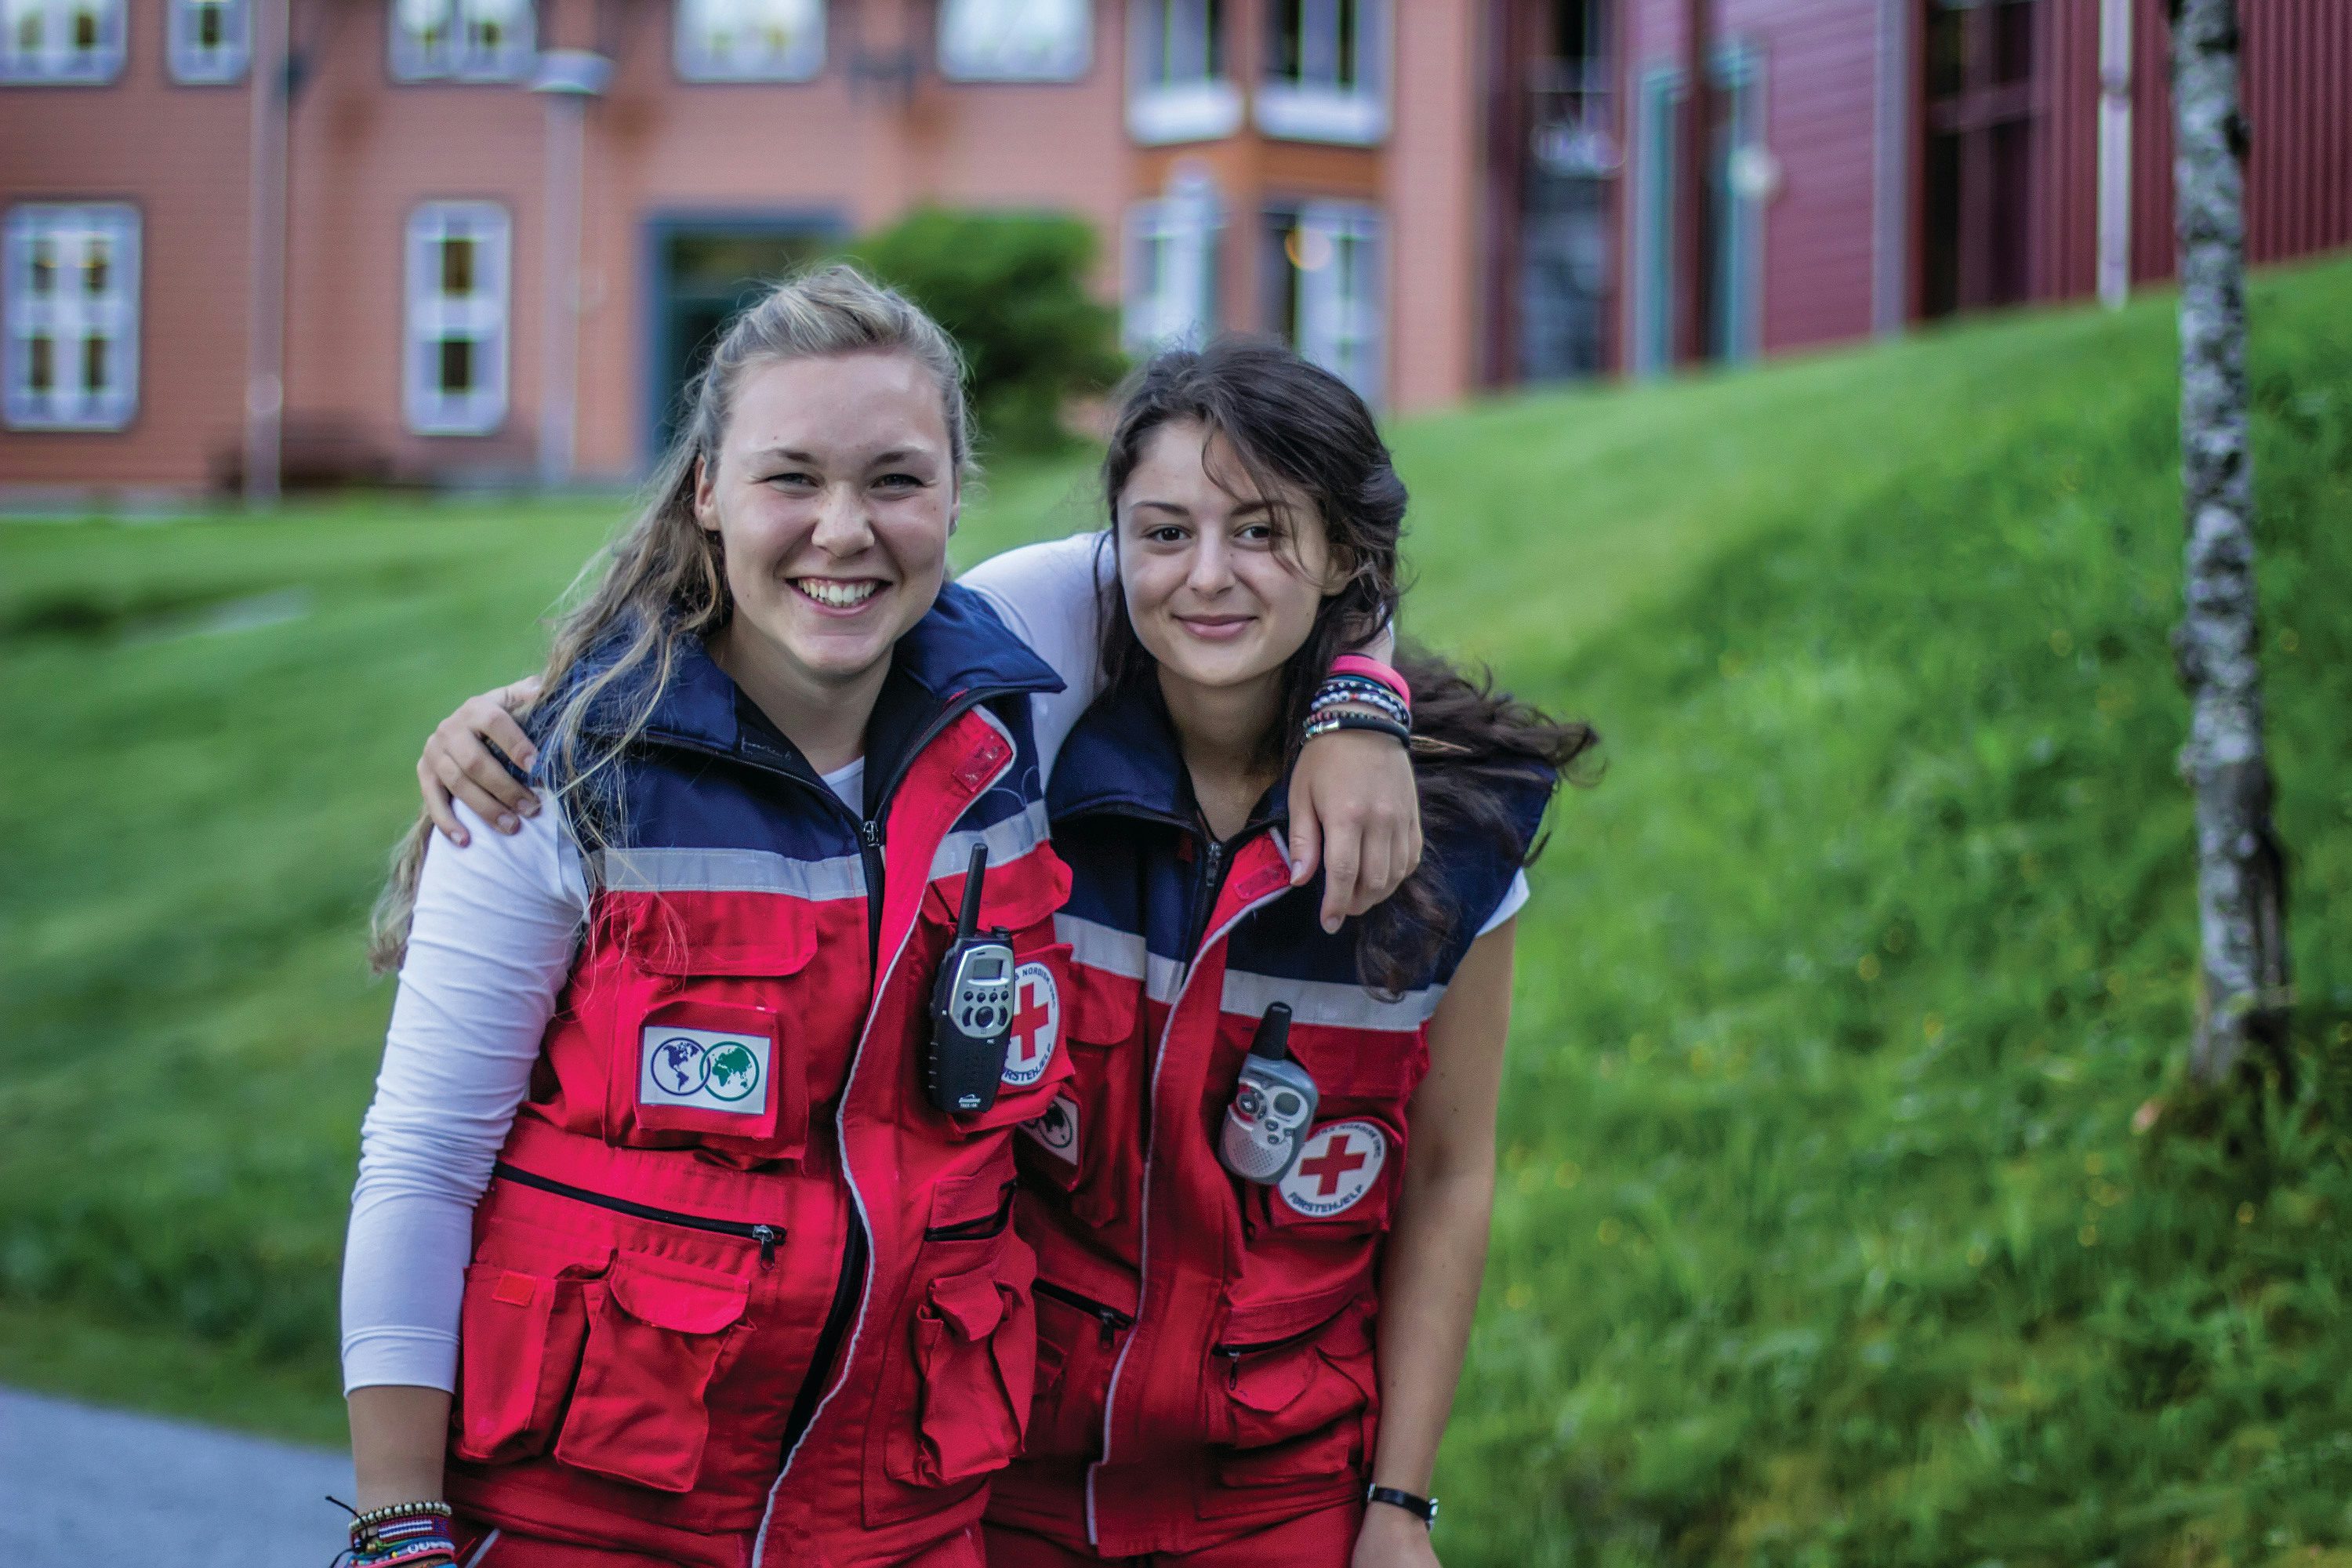 Two students dressed as paramedics have their arms wrapped around each other